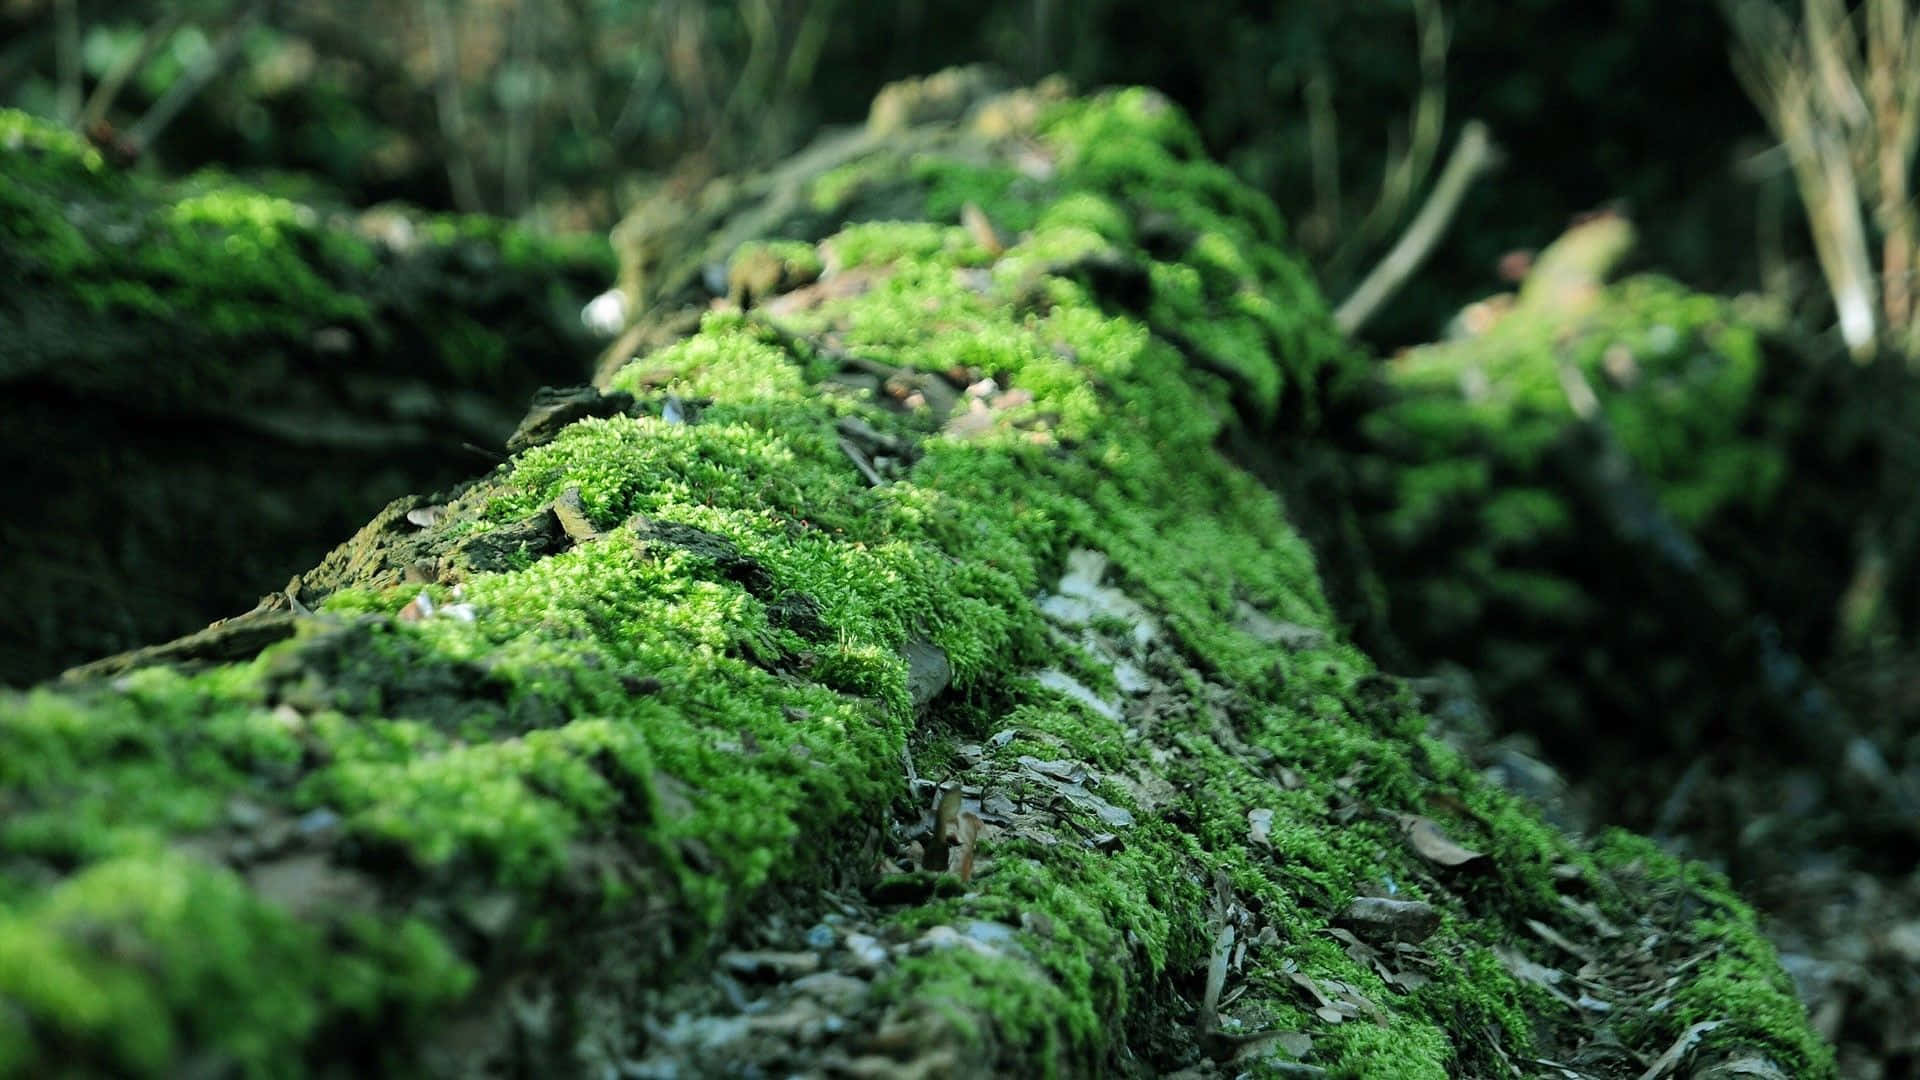 Natural Ecosystem of Moss